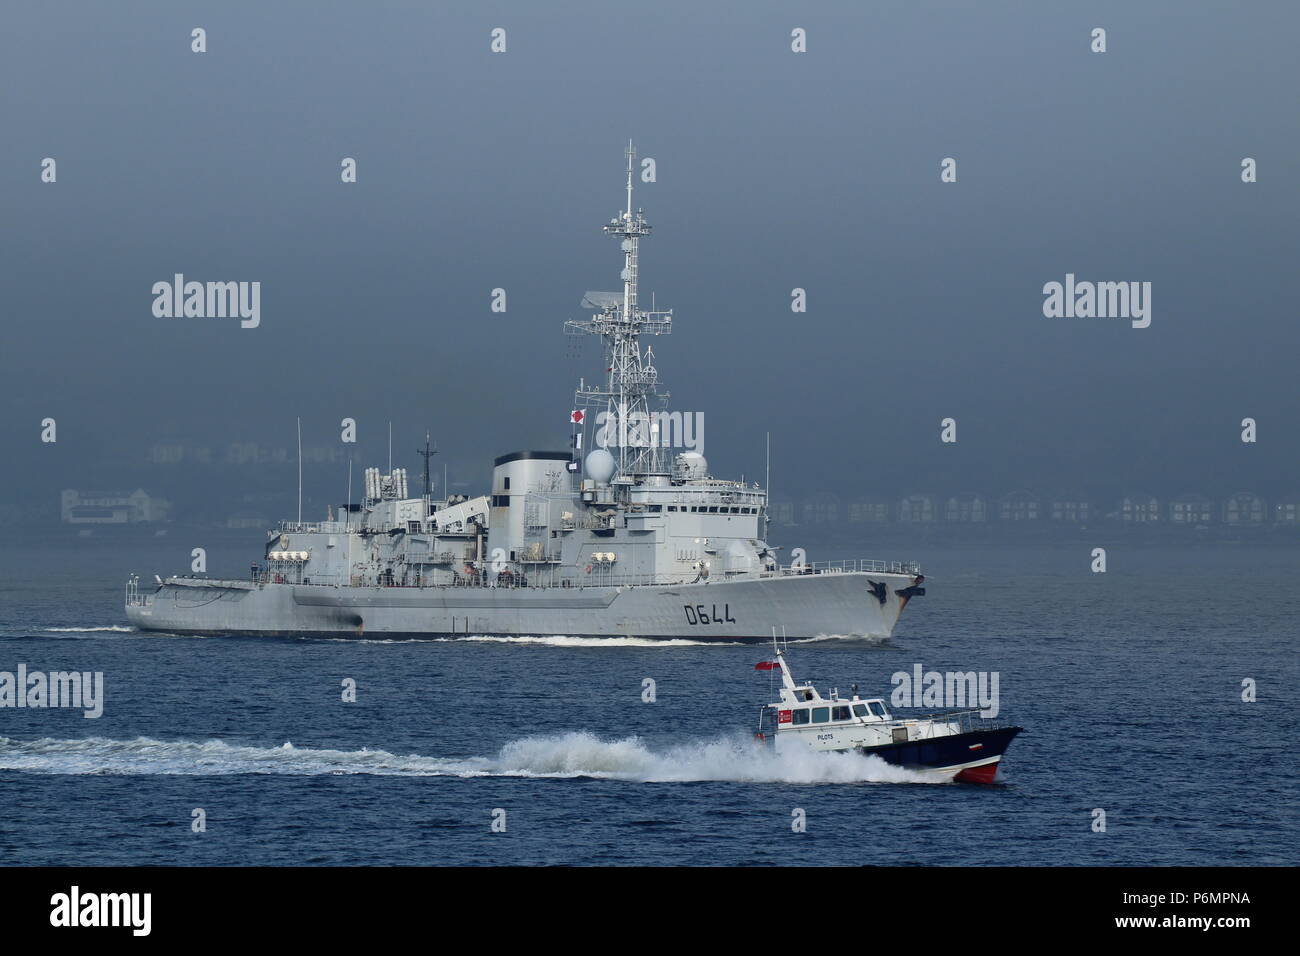 The Clydeport pilot boat Gantock, passing the French Navy frigate FS Primauguet D644 at Gourock on the Firth of Clyde. Stock Photo